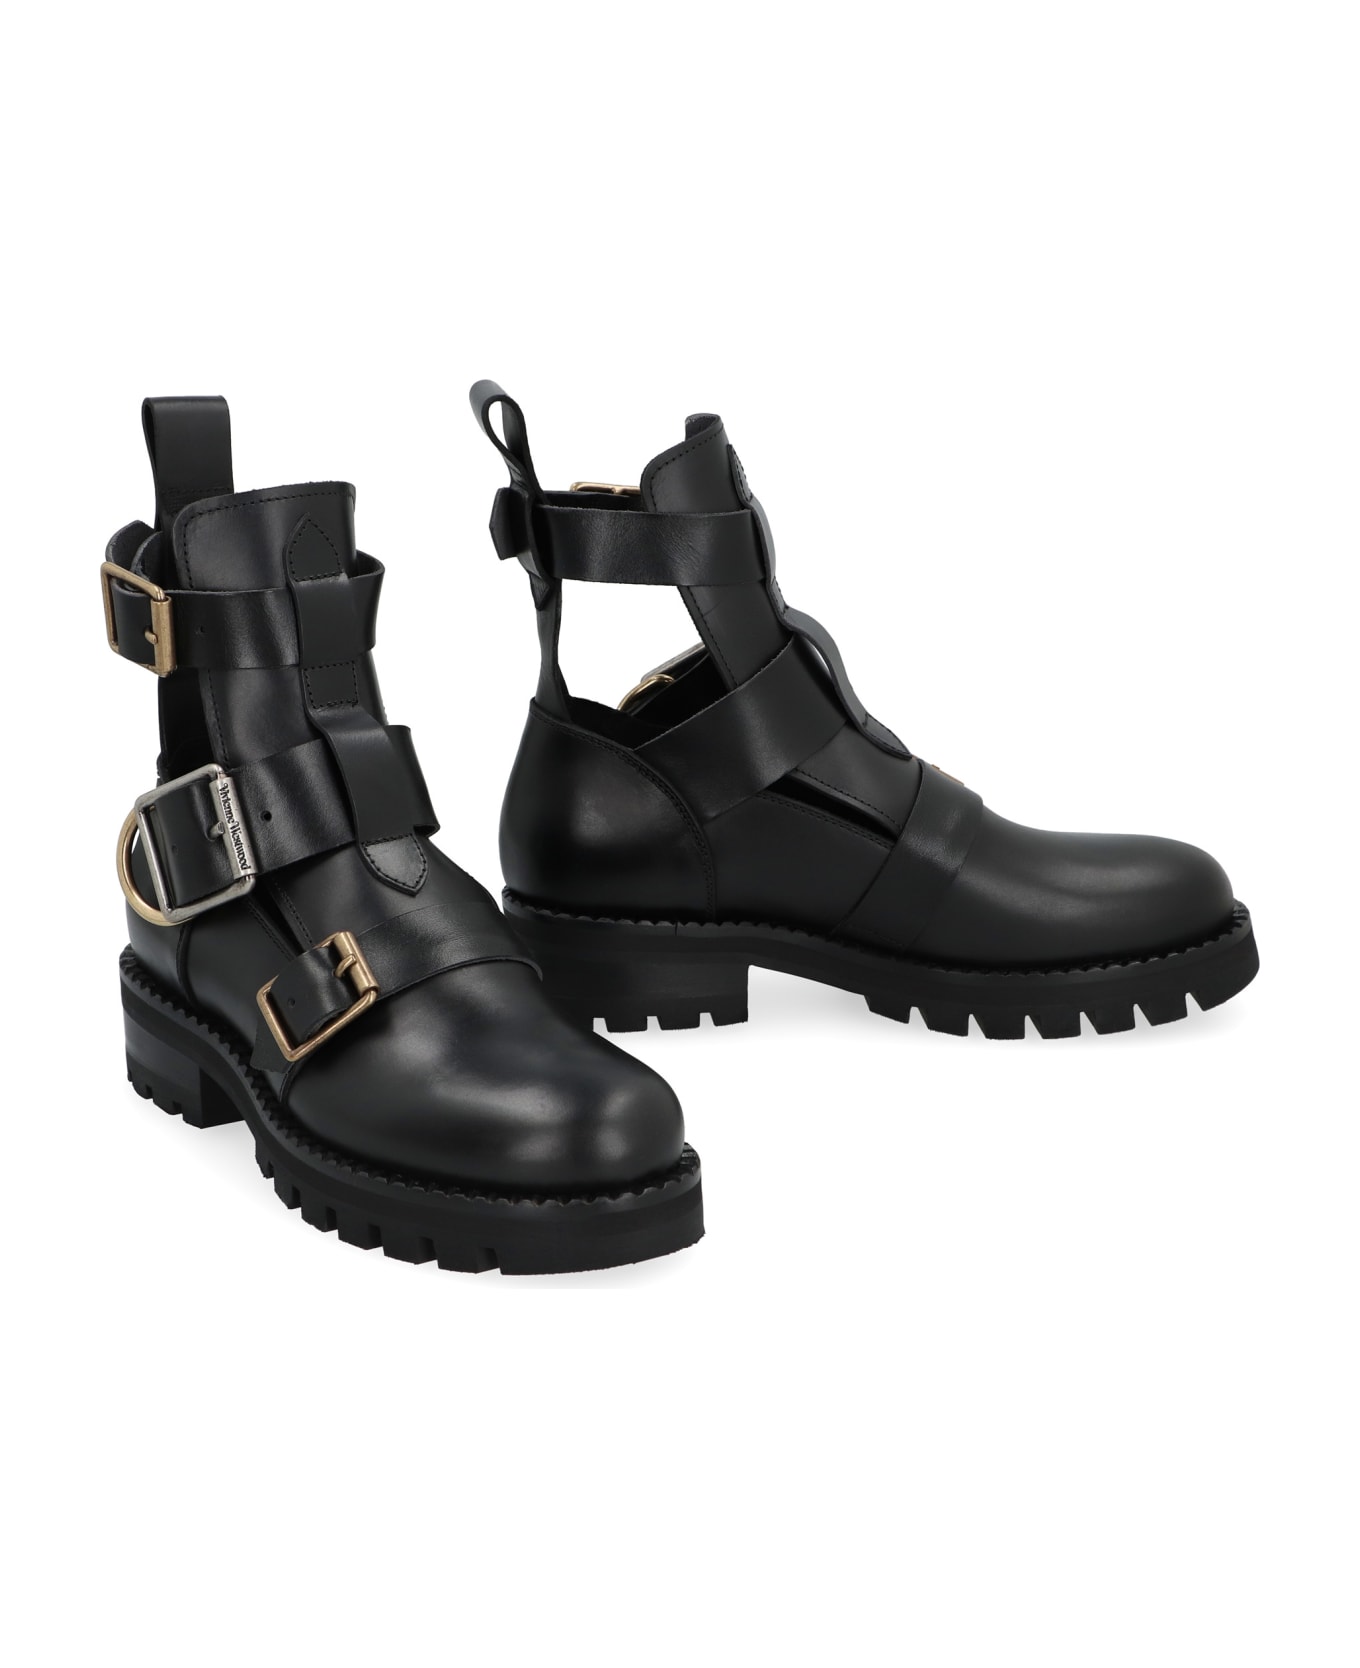 Vivienne Westwood Rome Leather Ankle Boots - black